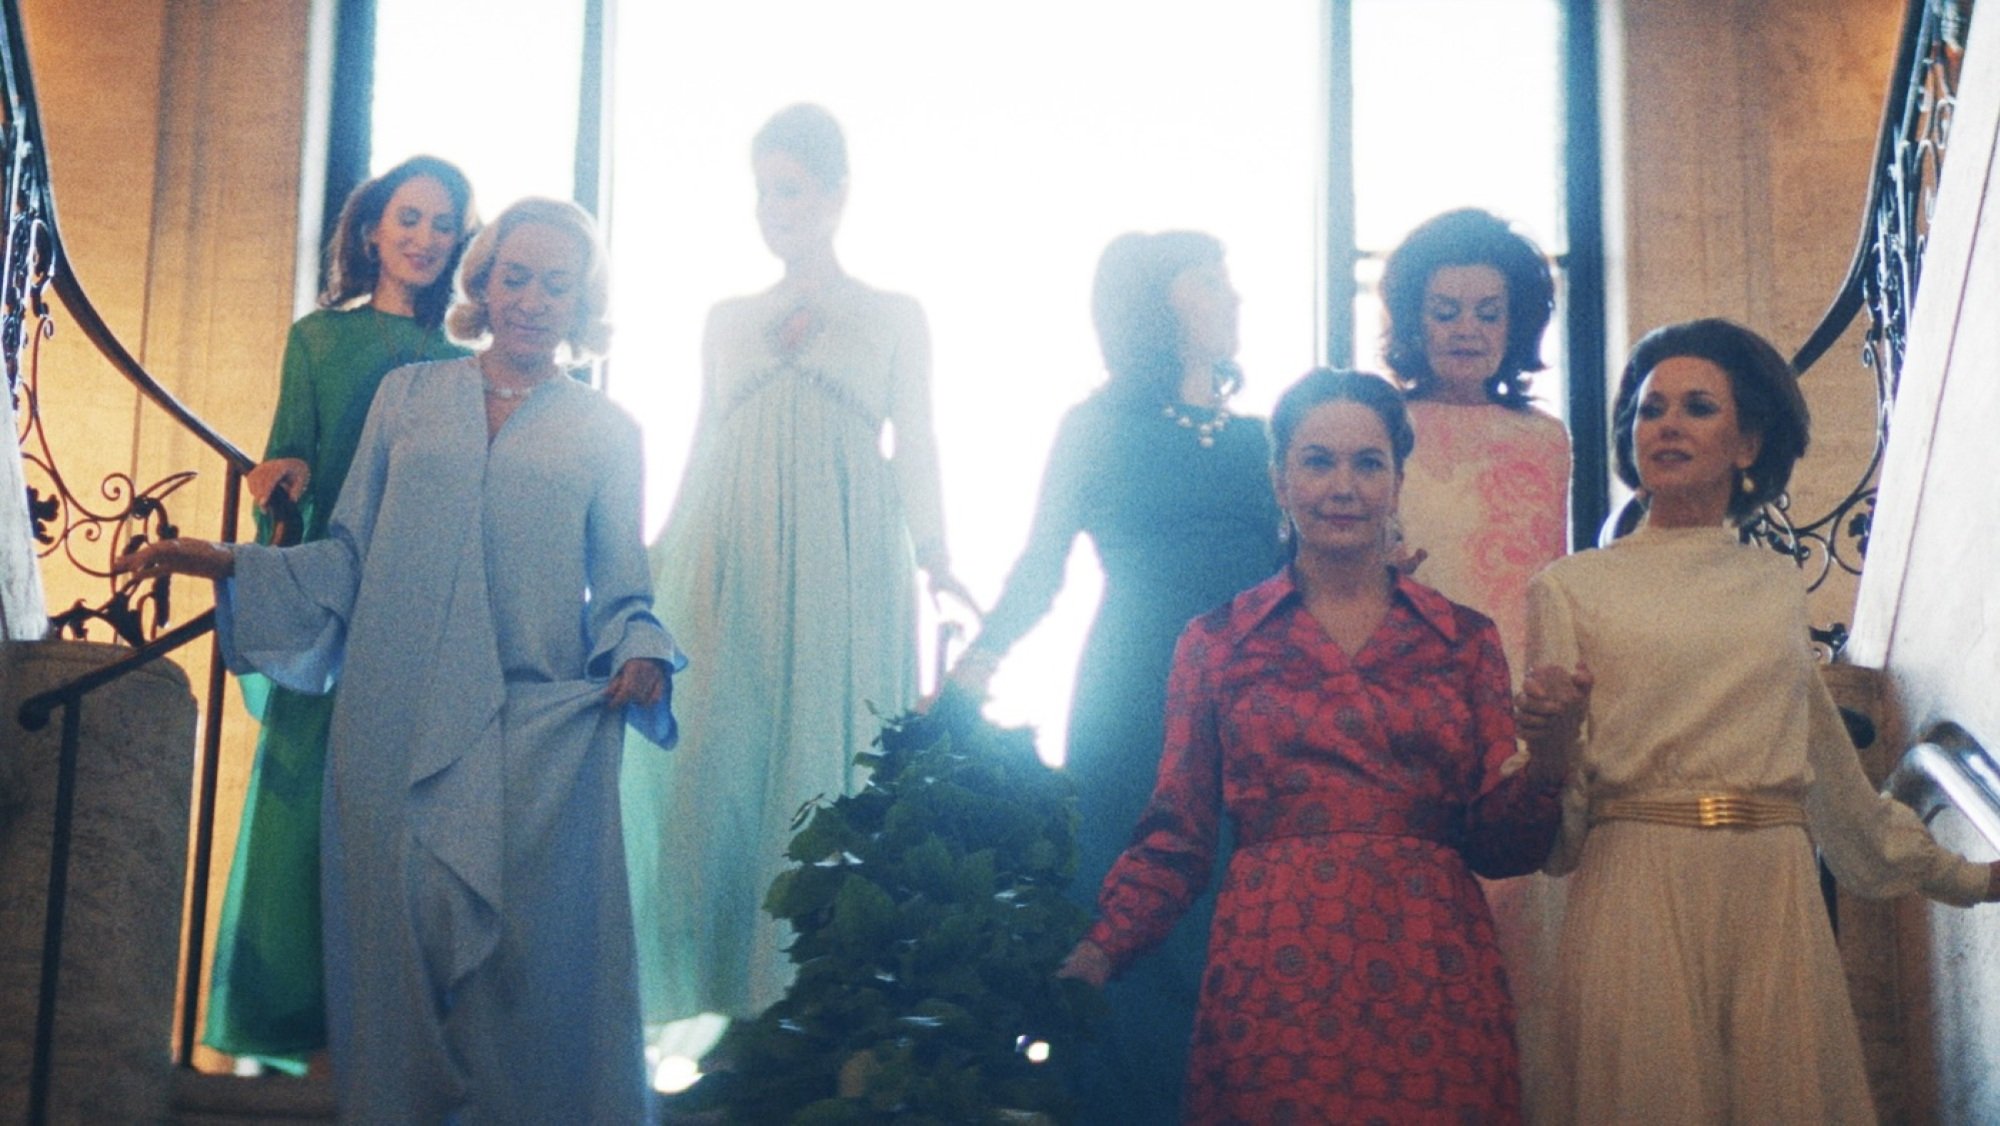 A group of women in fancy dresses walk down a large staircase.